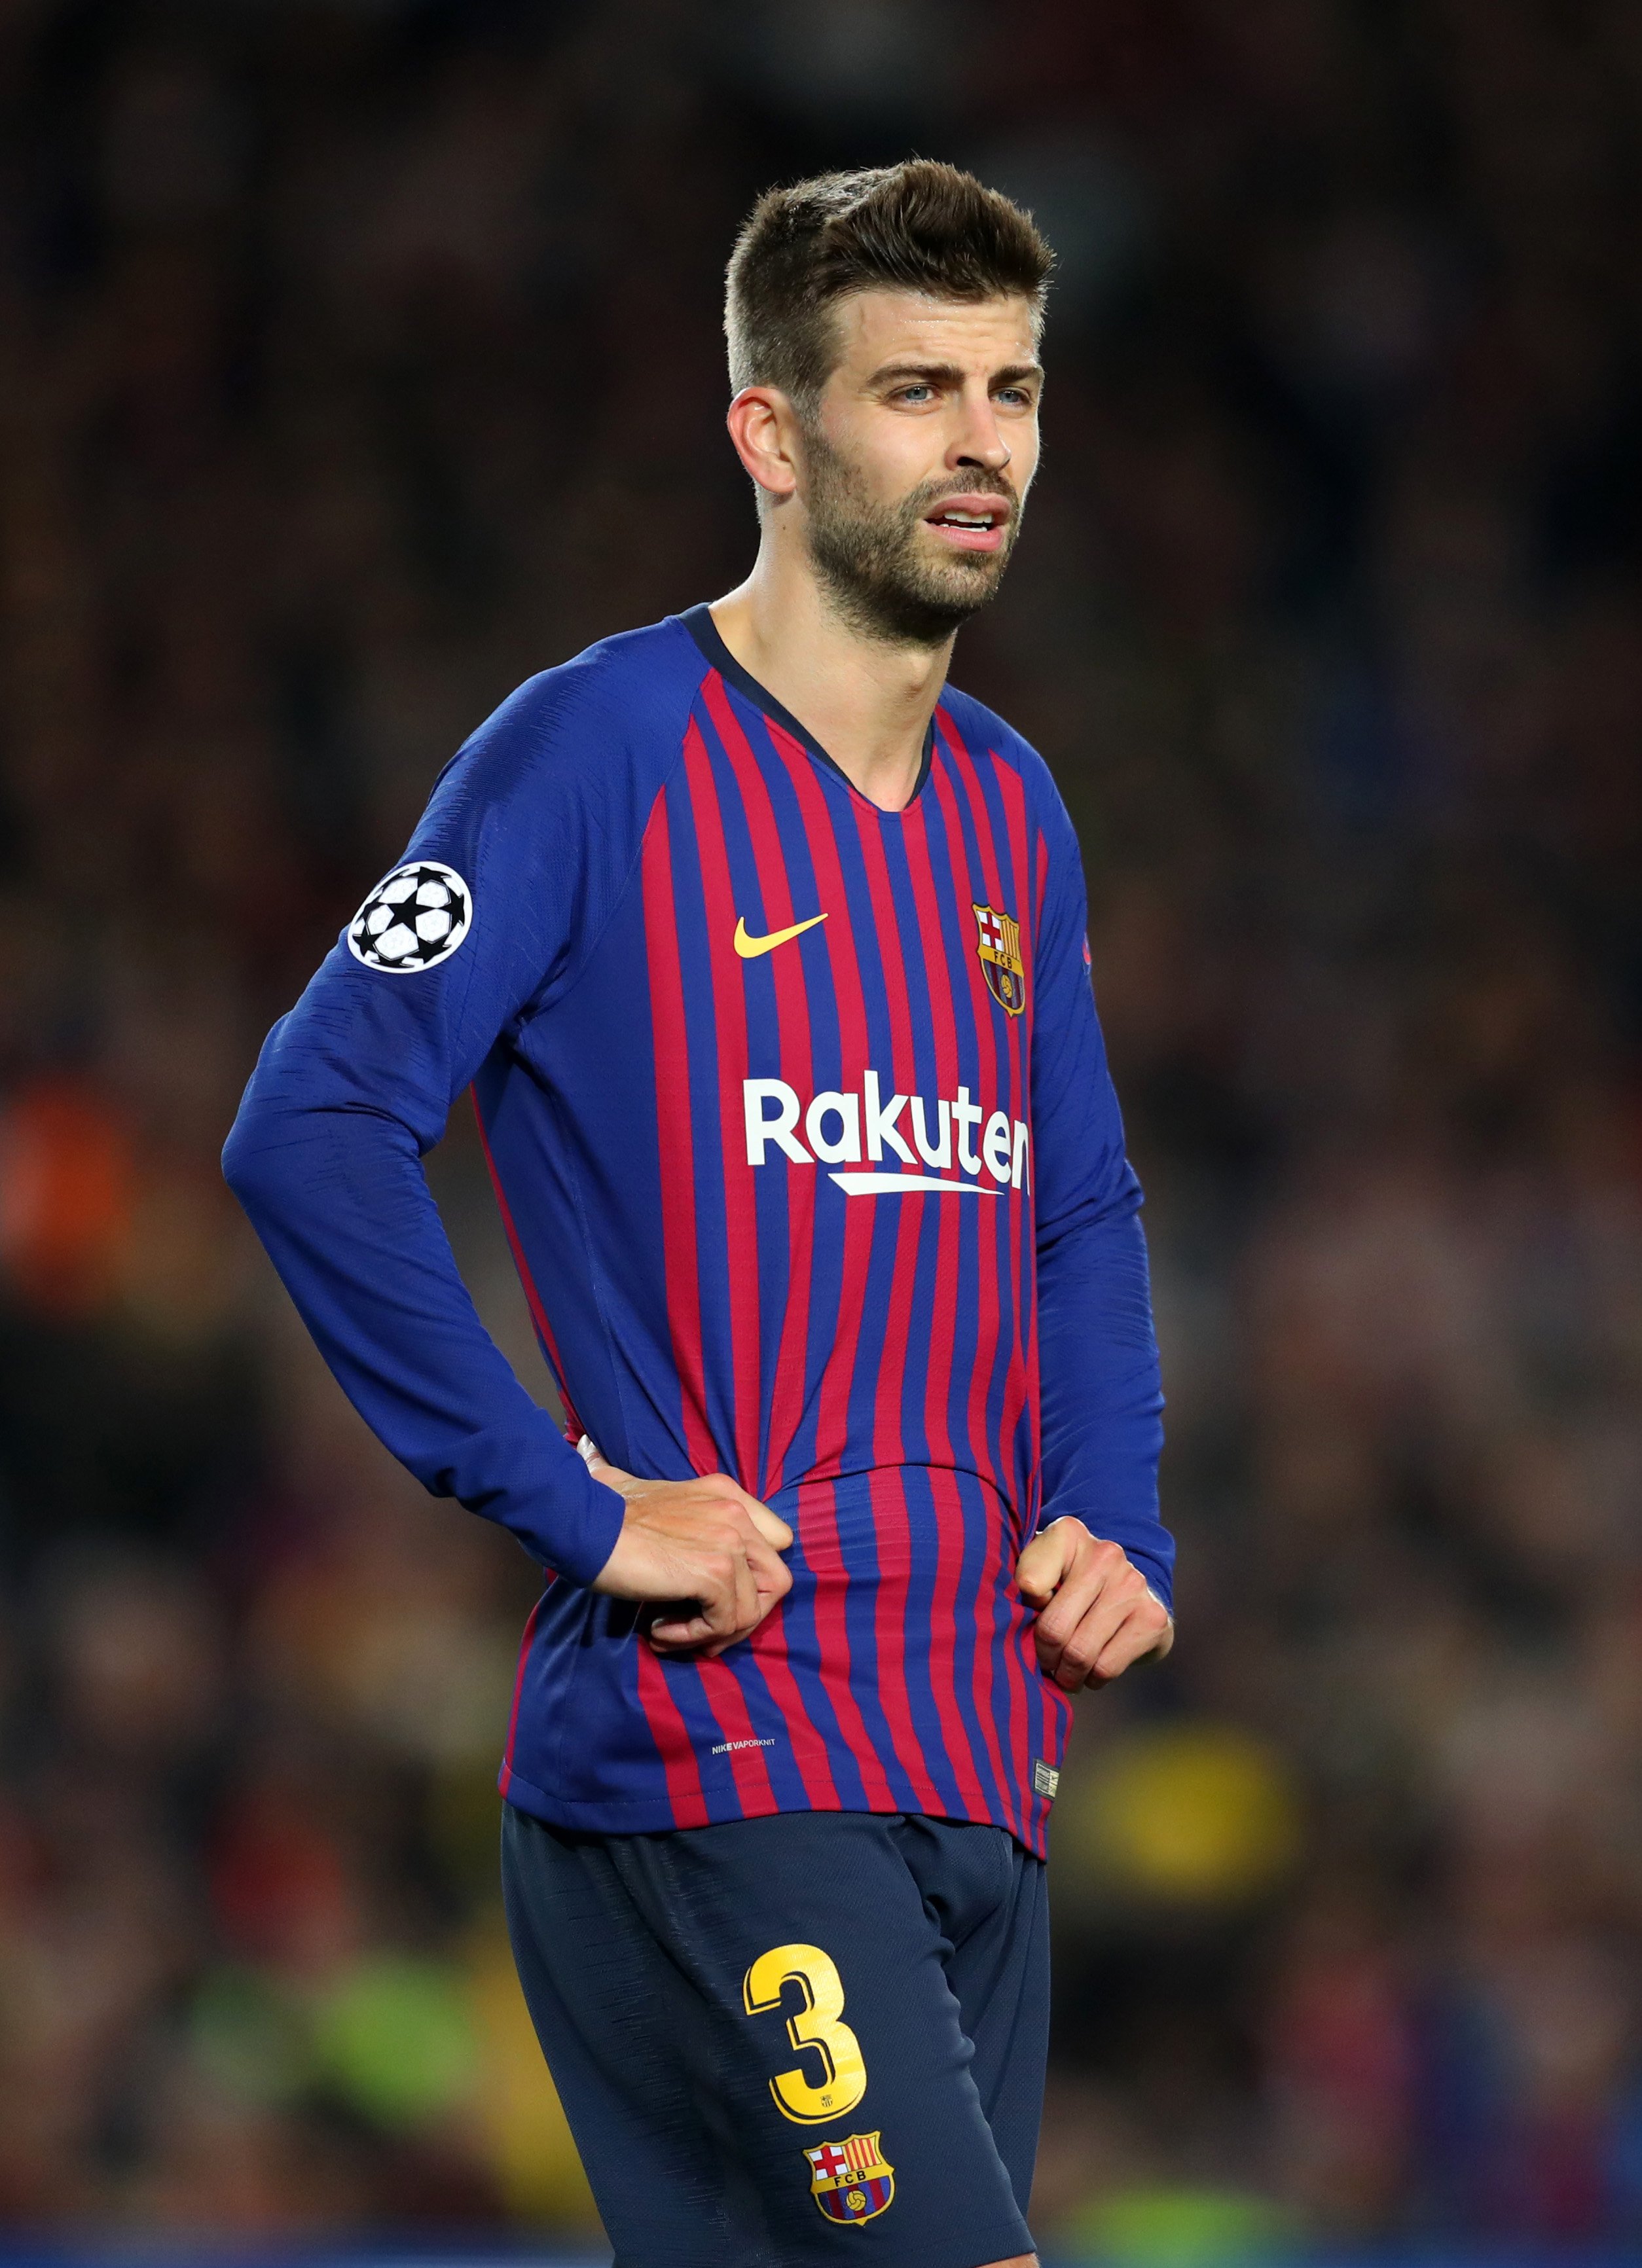 Gerard Pique during the UEFA Champions League Semi Final match between Barcelona and Liverpool at the Nou Camp on May 01, 2019 in Spain | Source: Getty Images